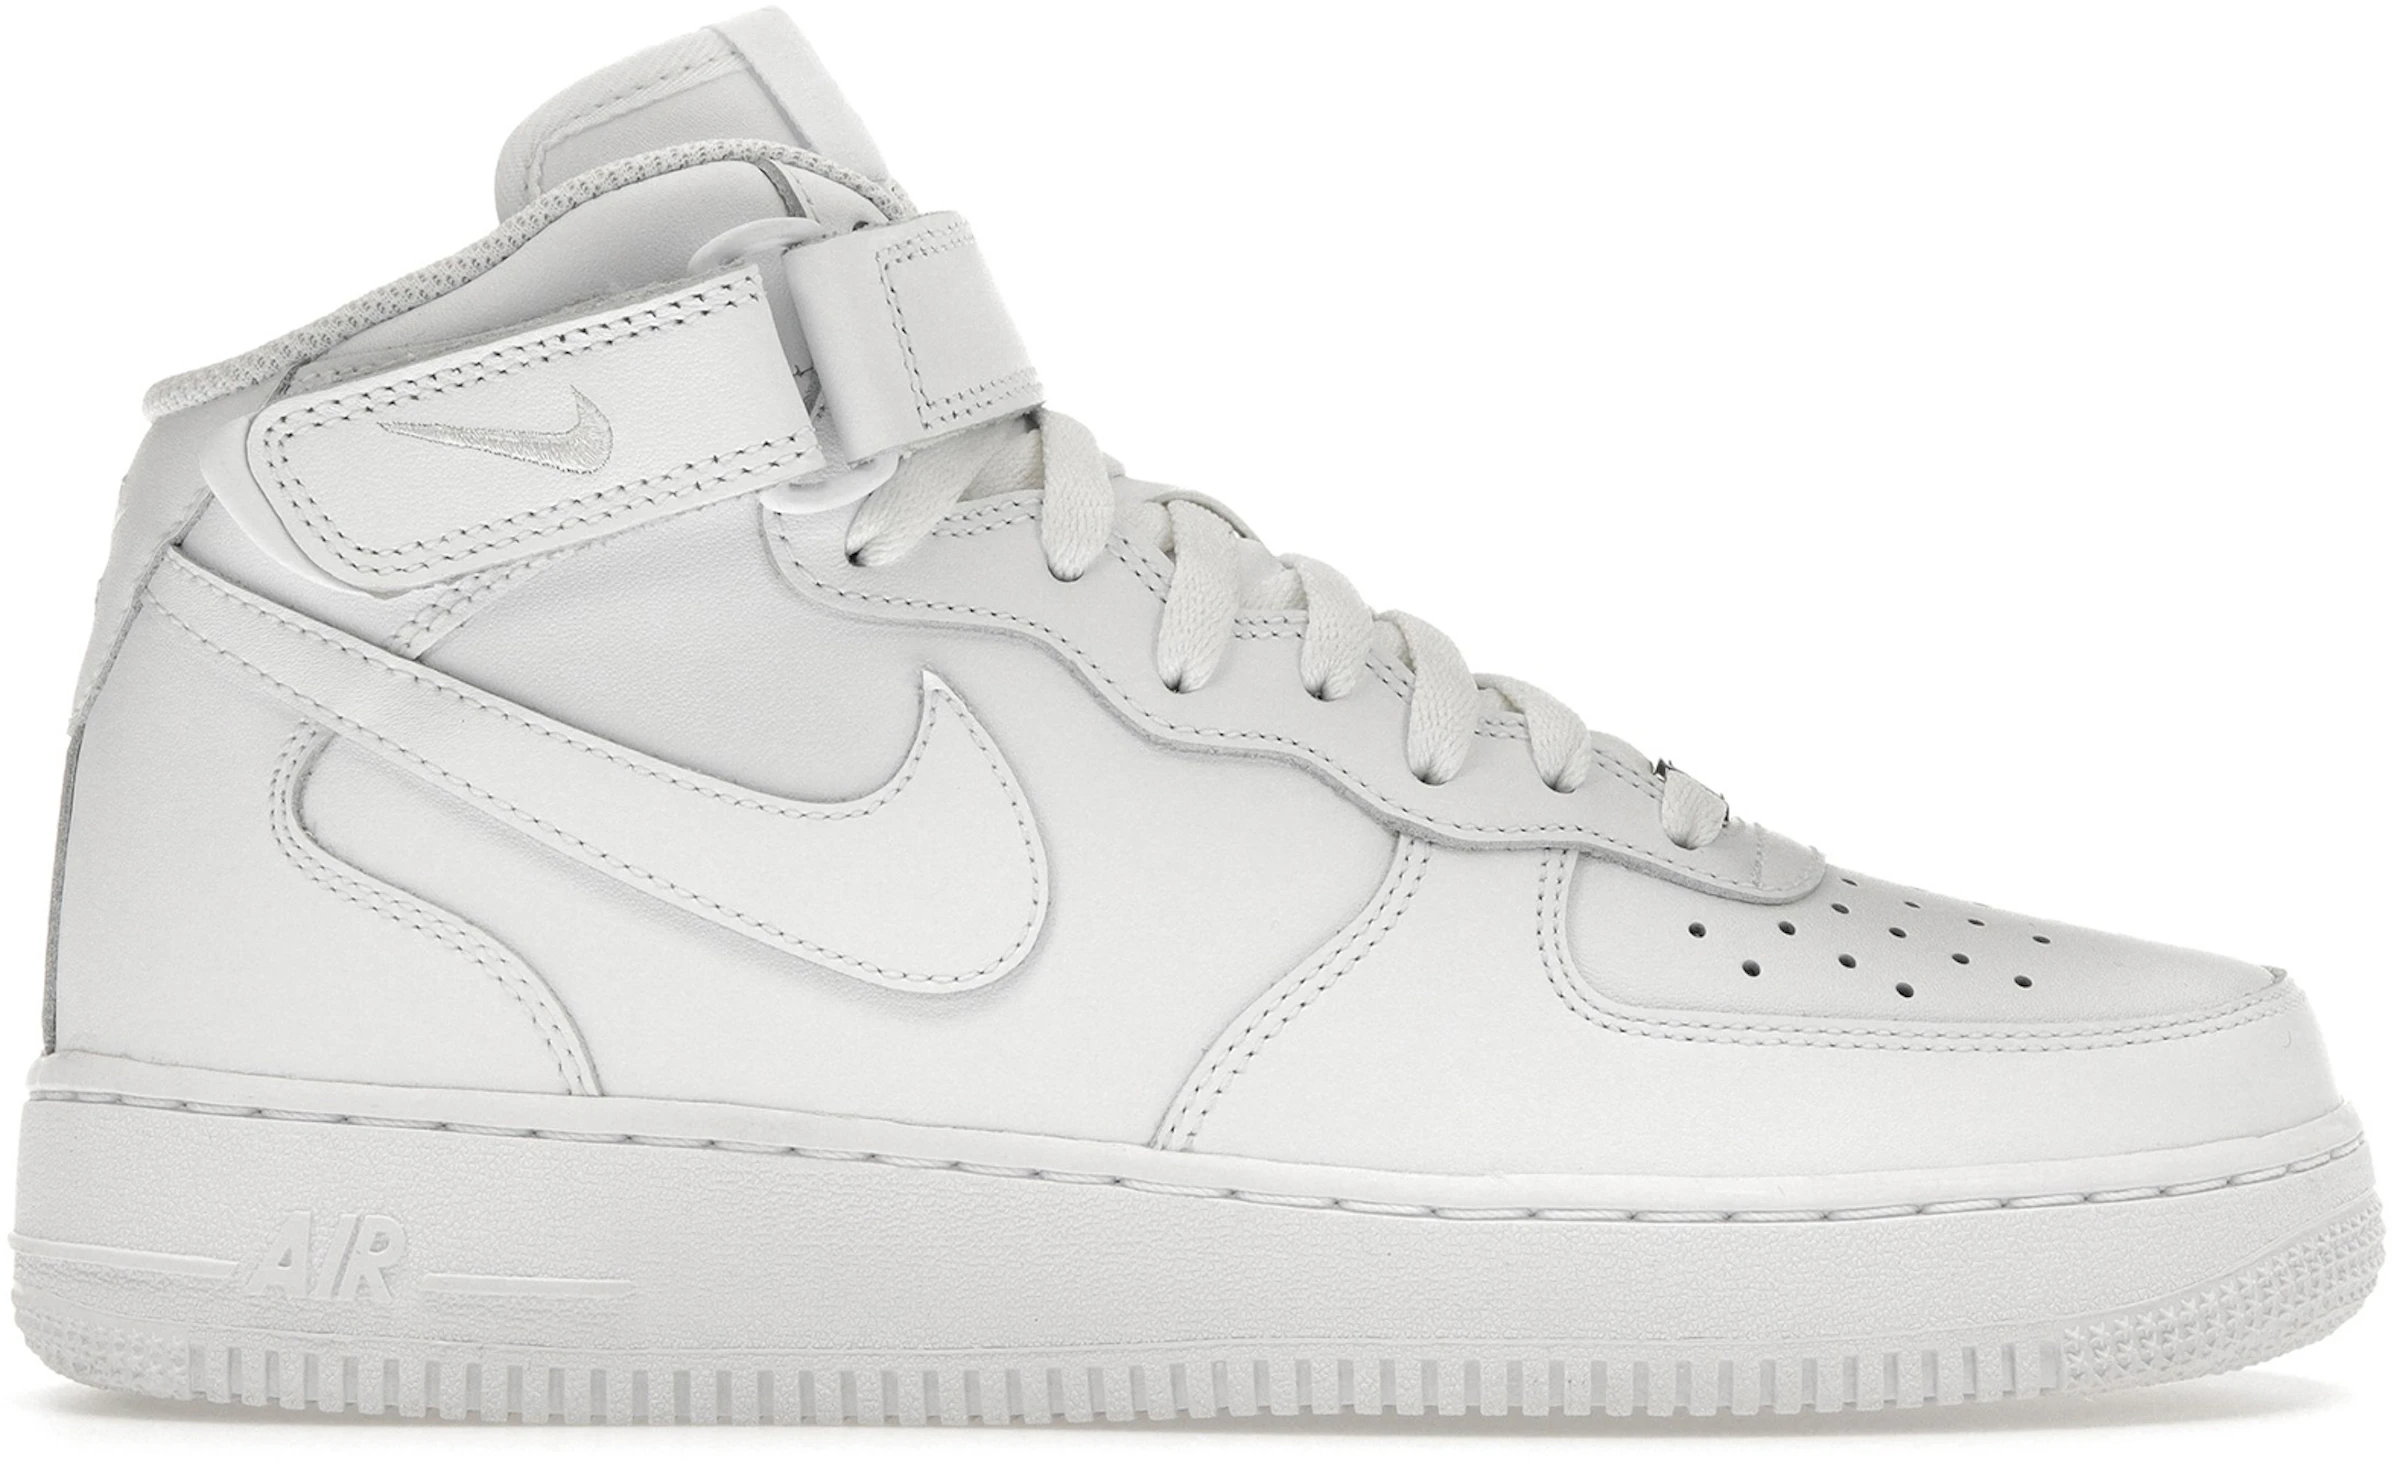 Nike Air Force 1 Mid White '07 - 315123-111/Cw2289-111 - Us